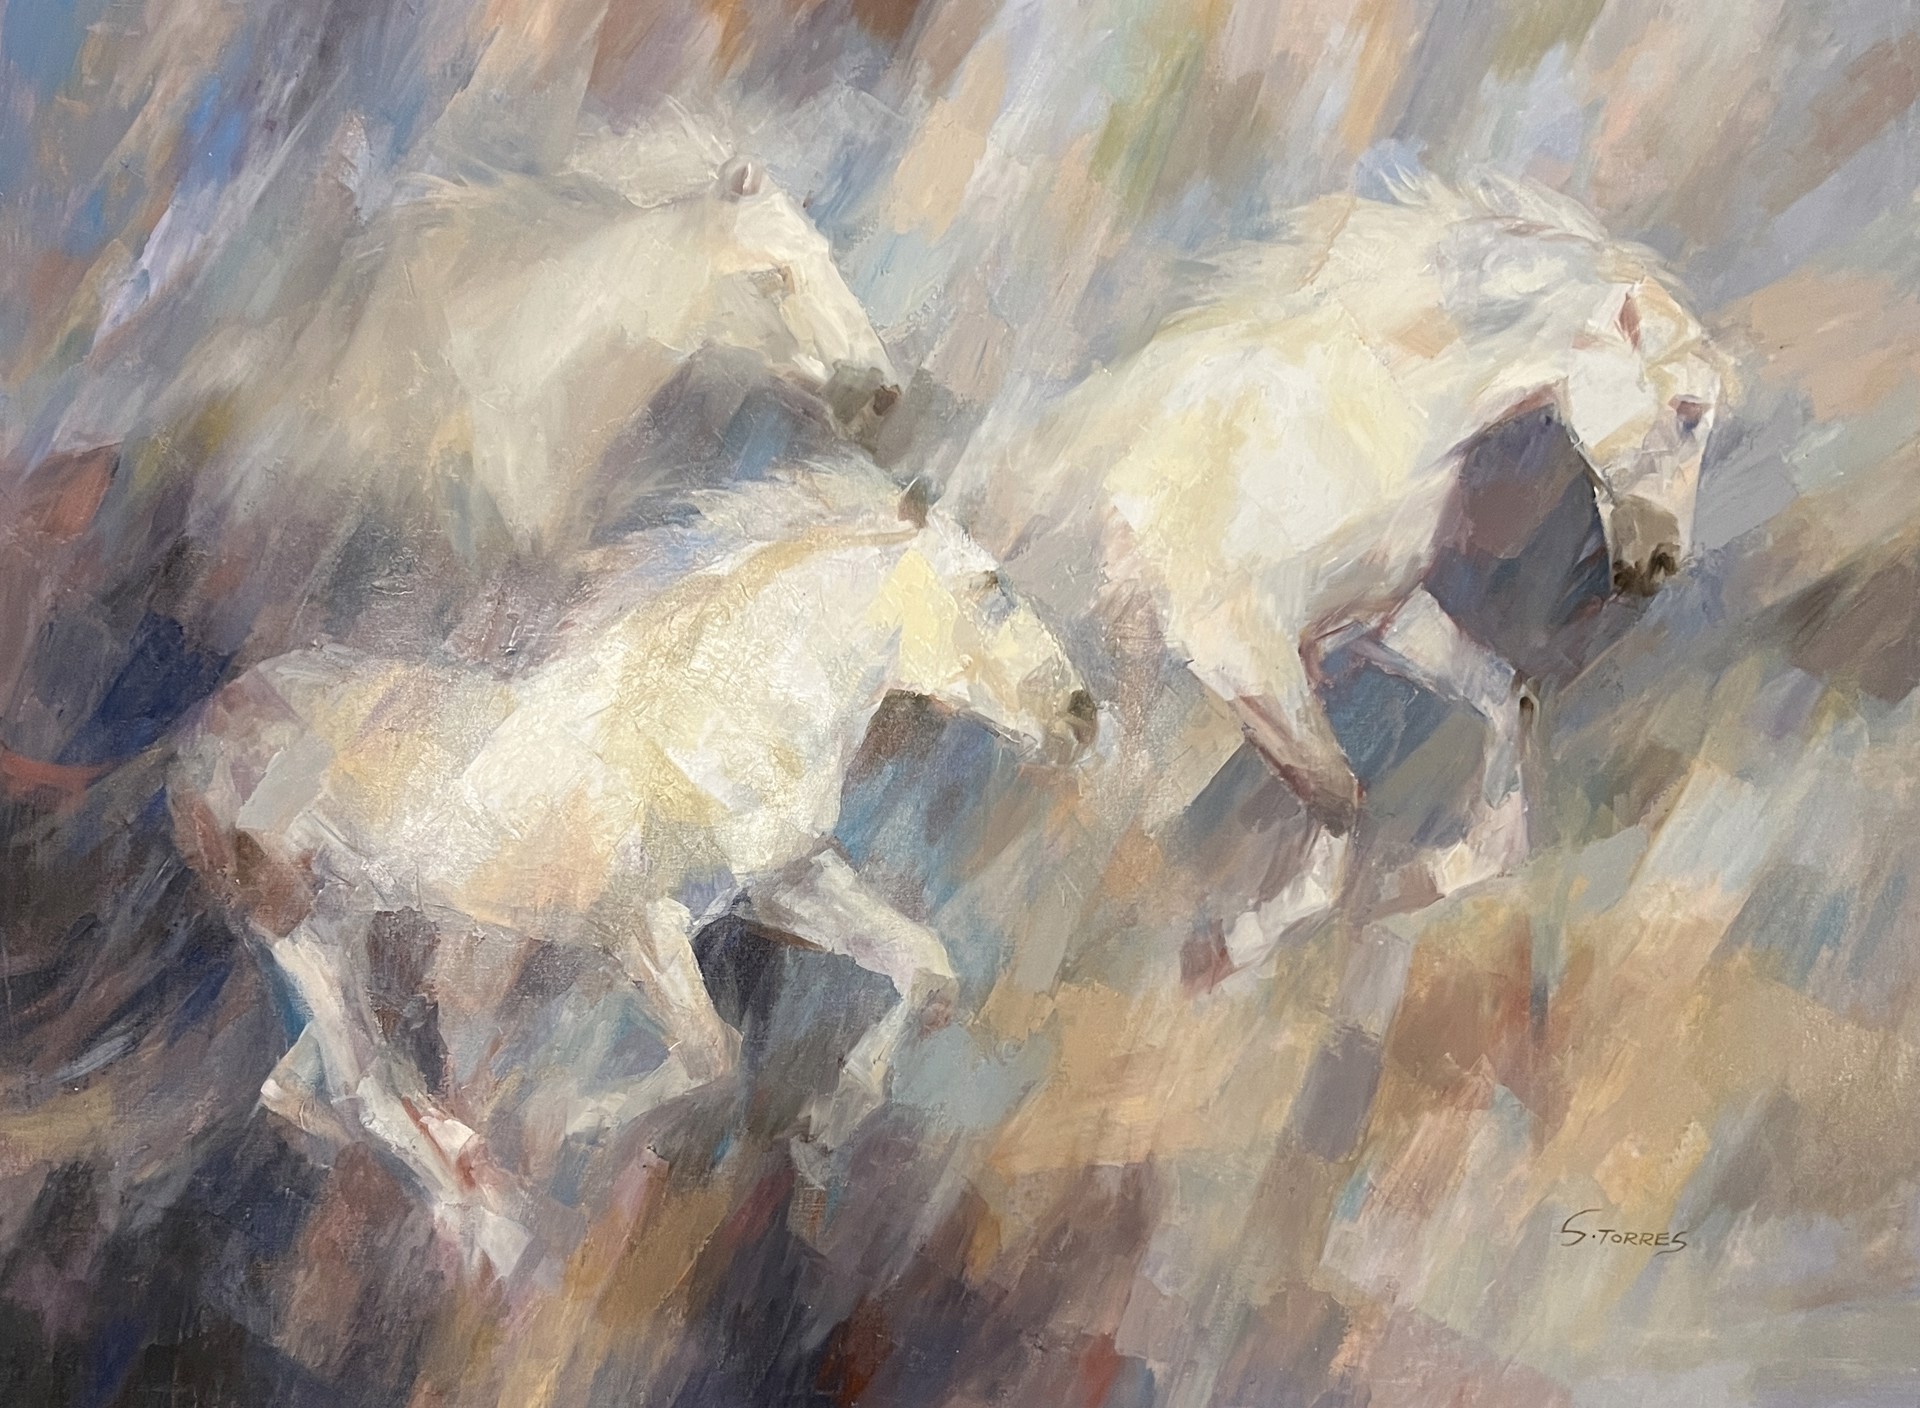 THREE WHITE HORSES by S TORRES